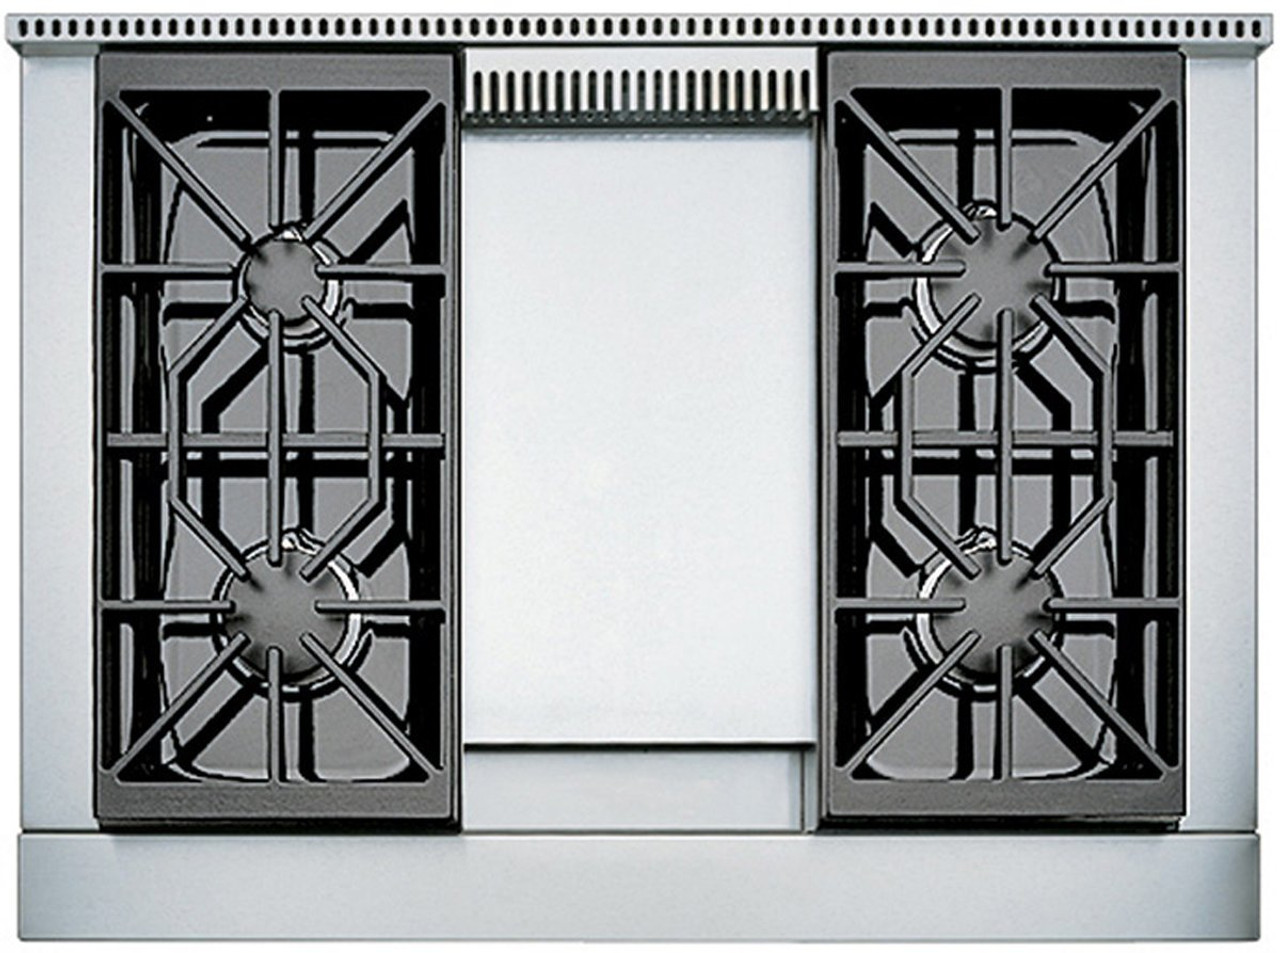 ICBSRT364G - 91cm 4 Burner Cooktop with Infrared Teppanyaki Plate - Stainless Steel